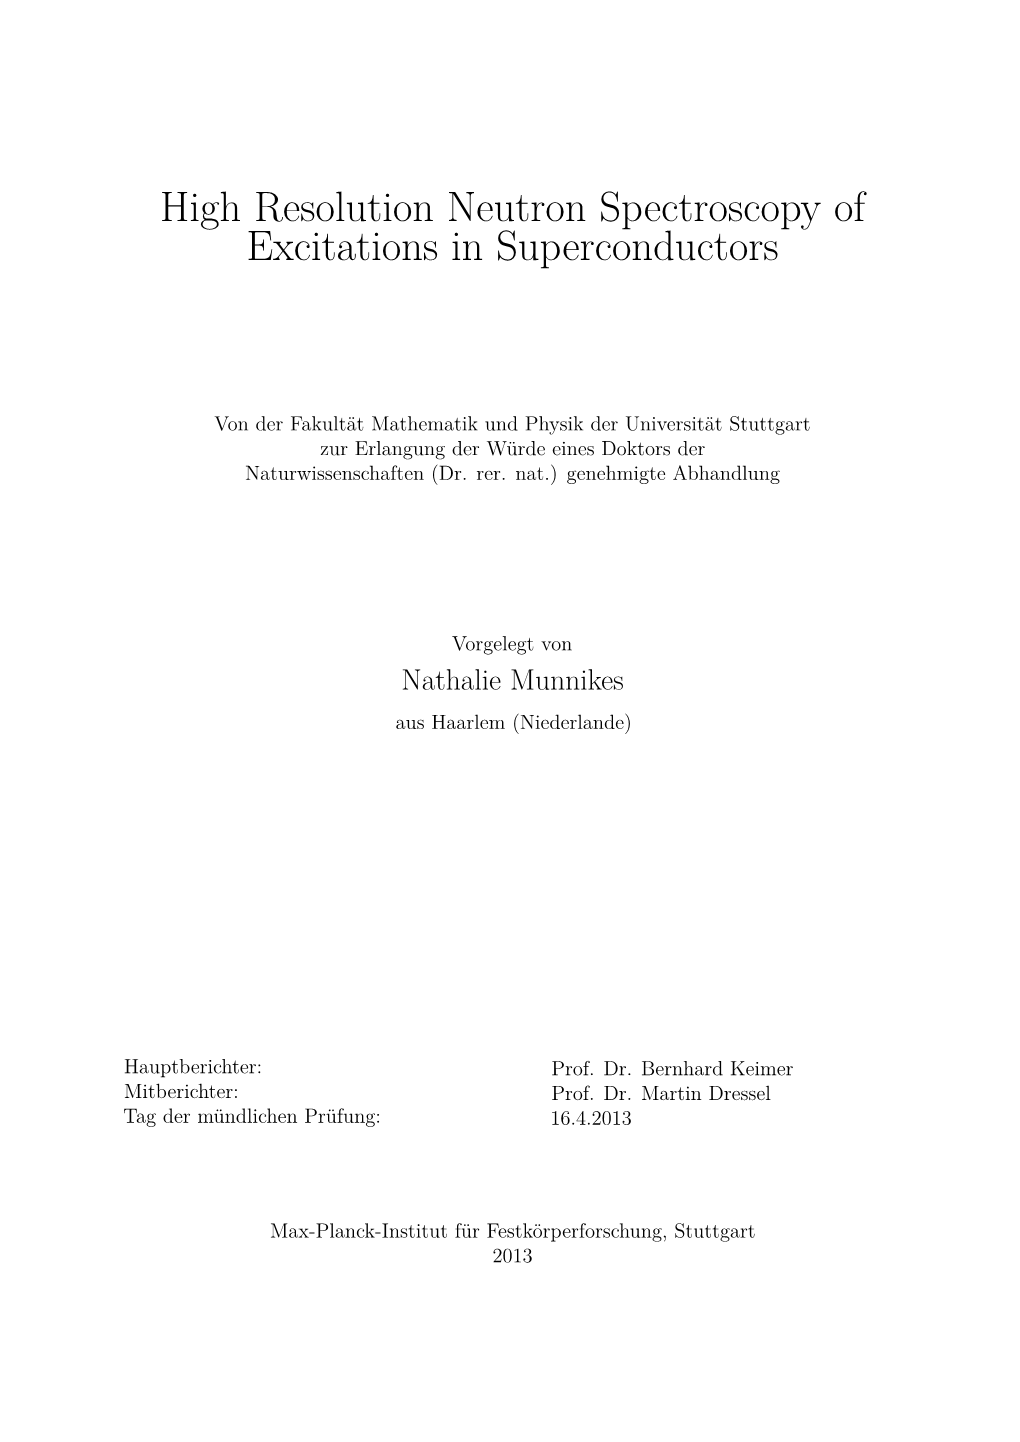 High Resolution Neutron Spectroscopy of Excitations in Superconductors